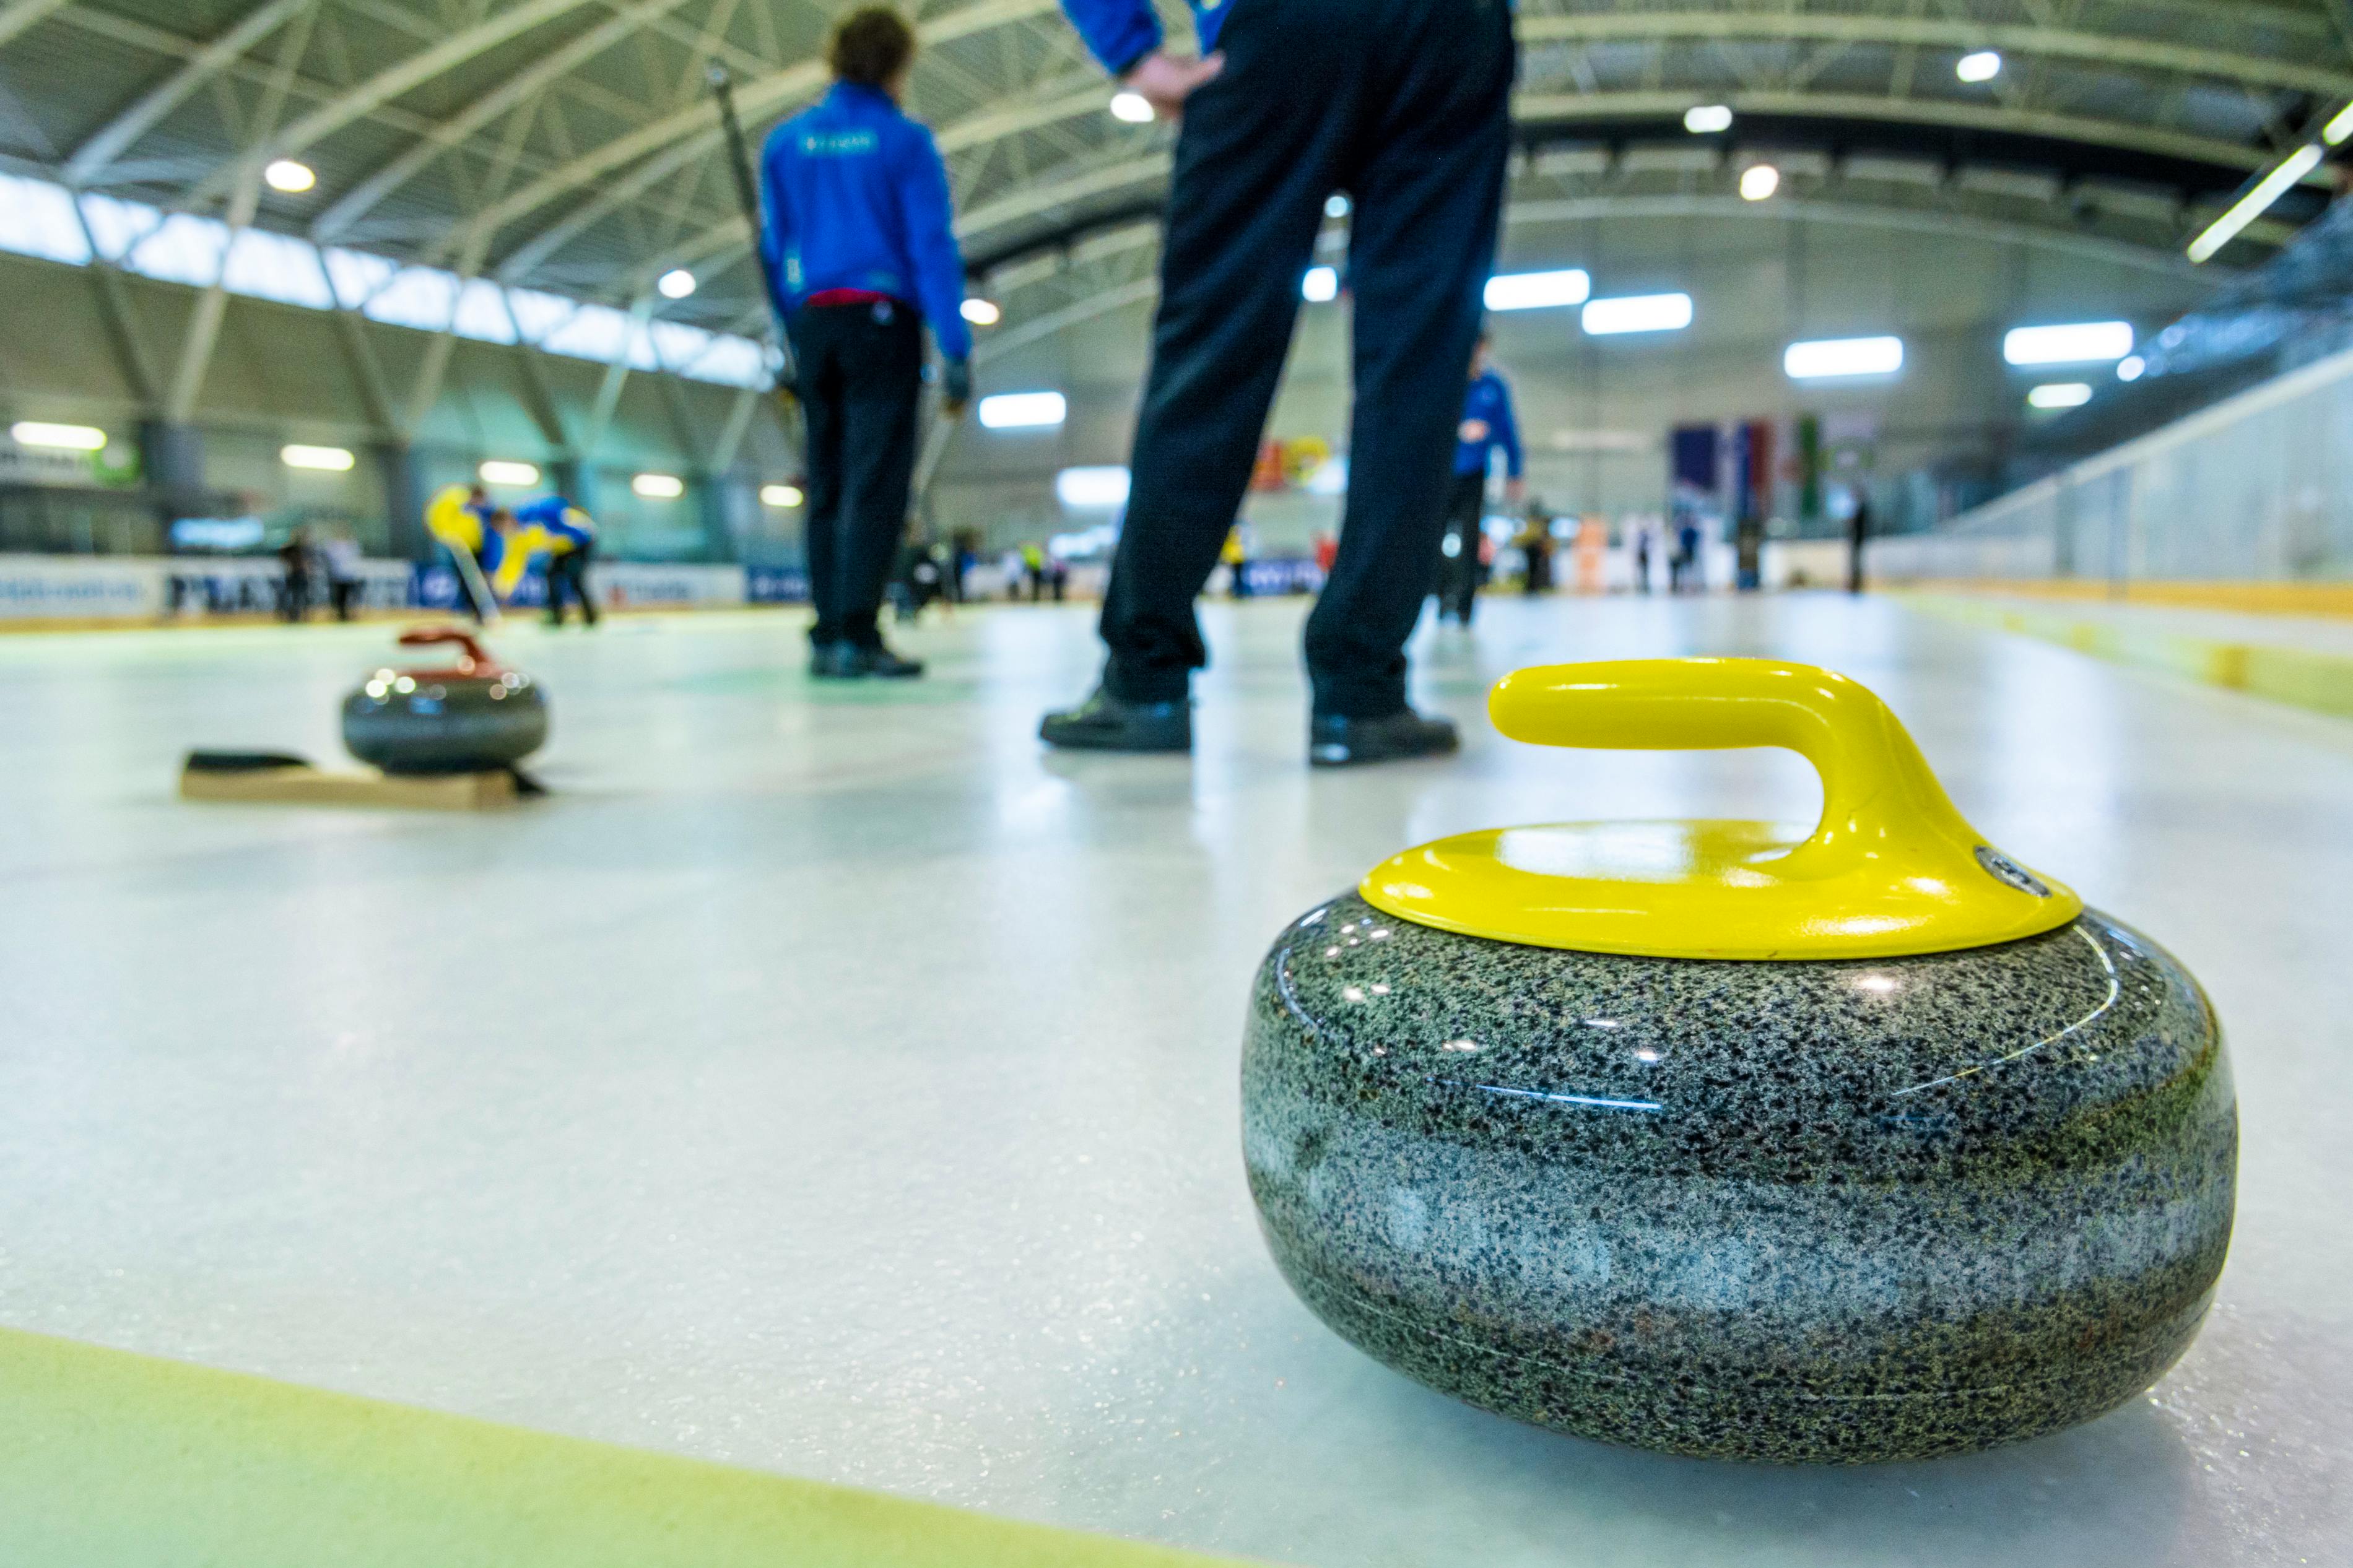 2021 WORLD WOMEN'S CURLING CHAMPIONSHIP BEGINS THIS FRIDAY — USA CURLING